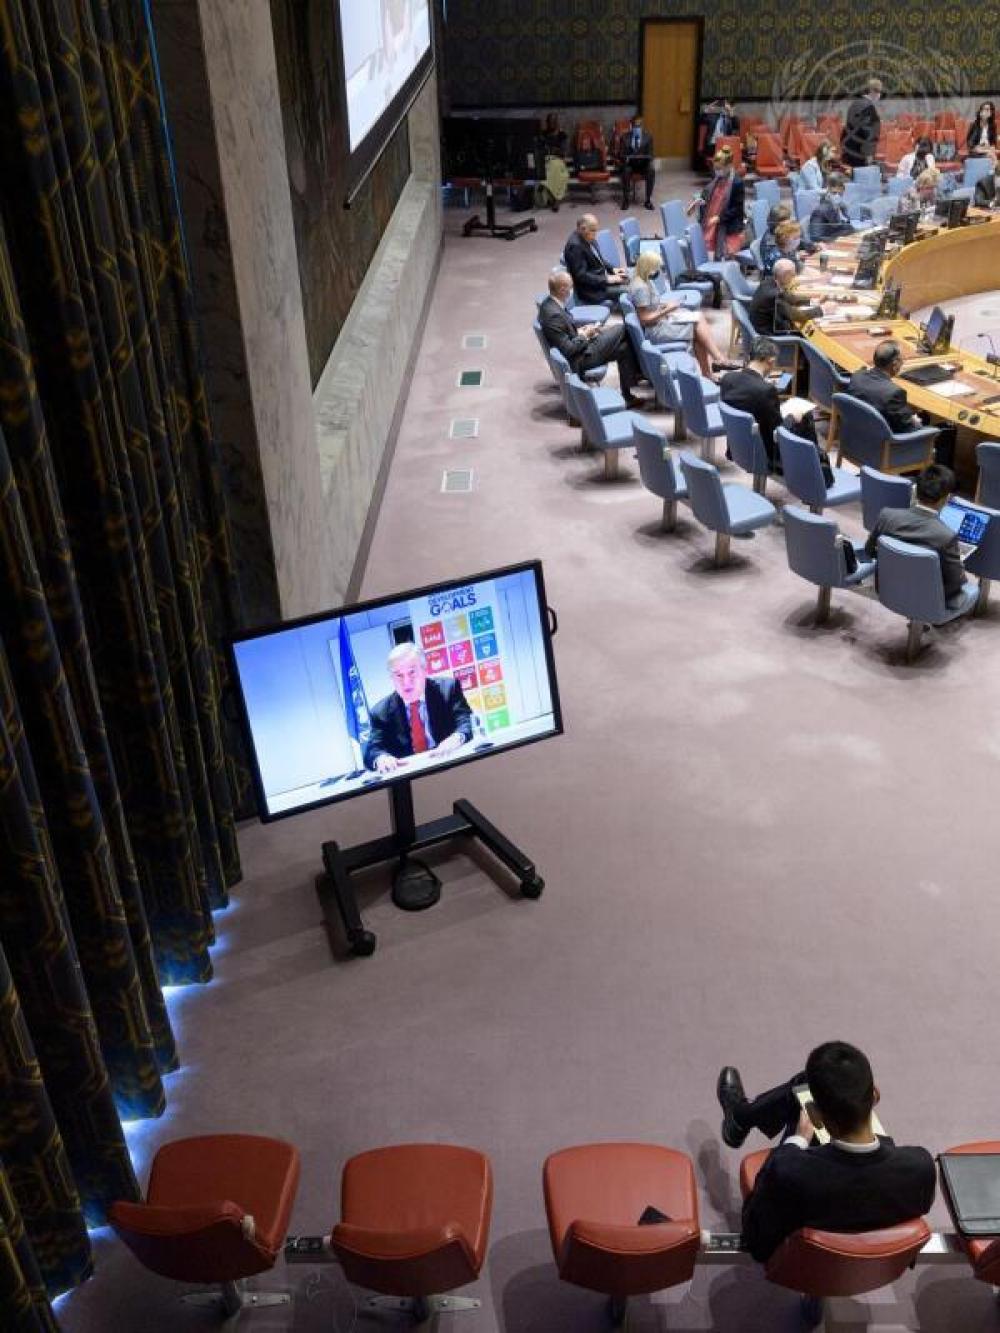 In Images: The day at UN (Jun 23, 2021)